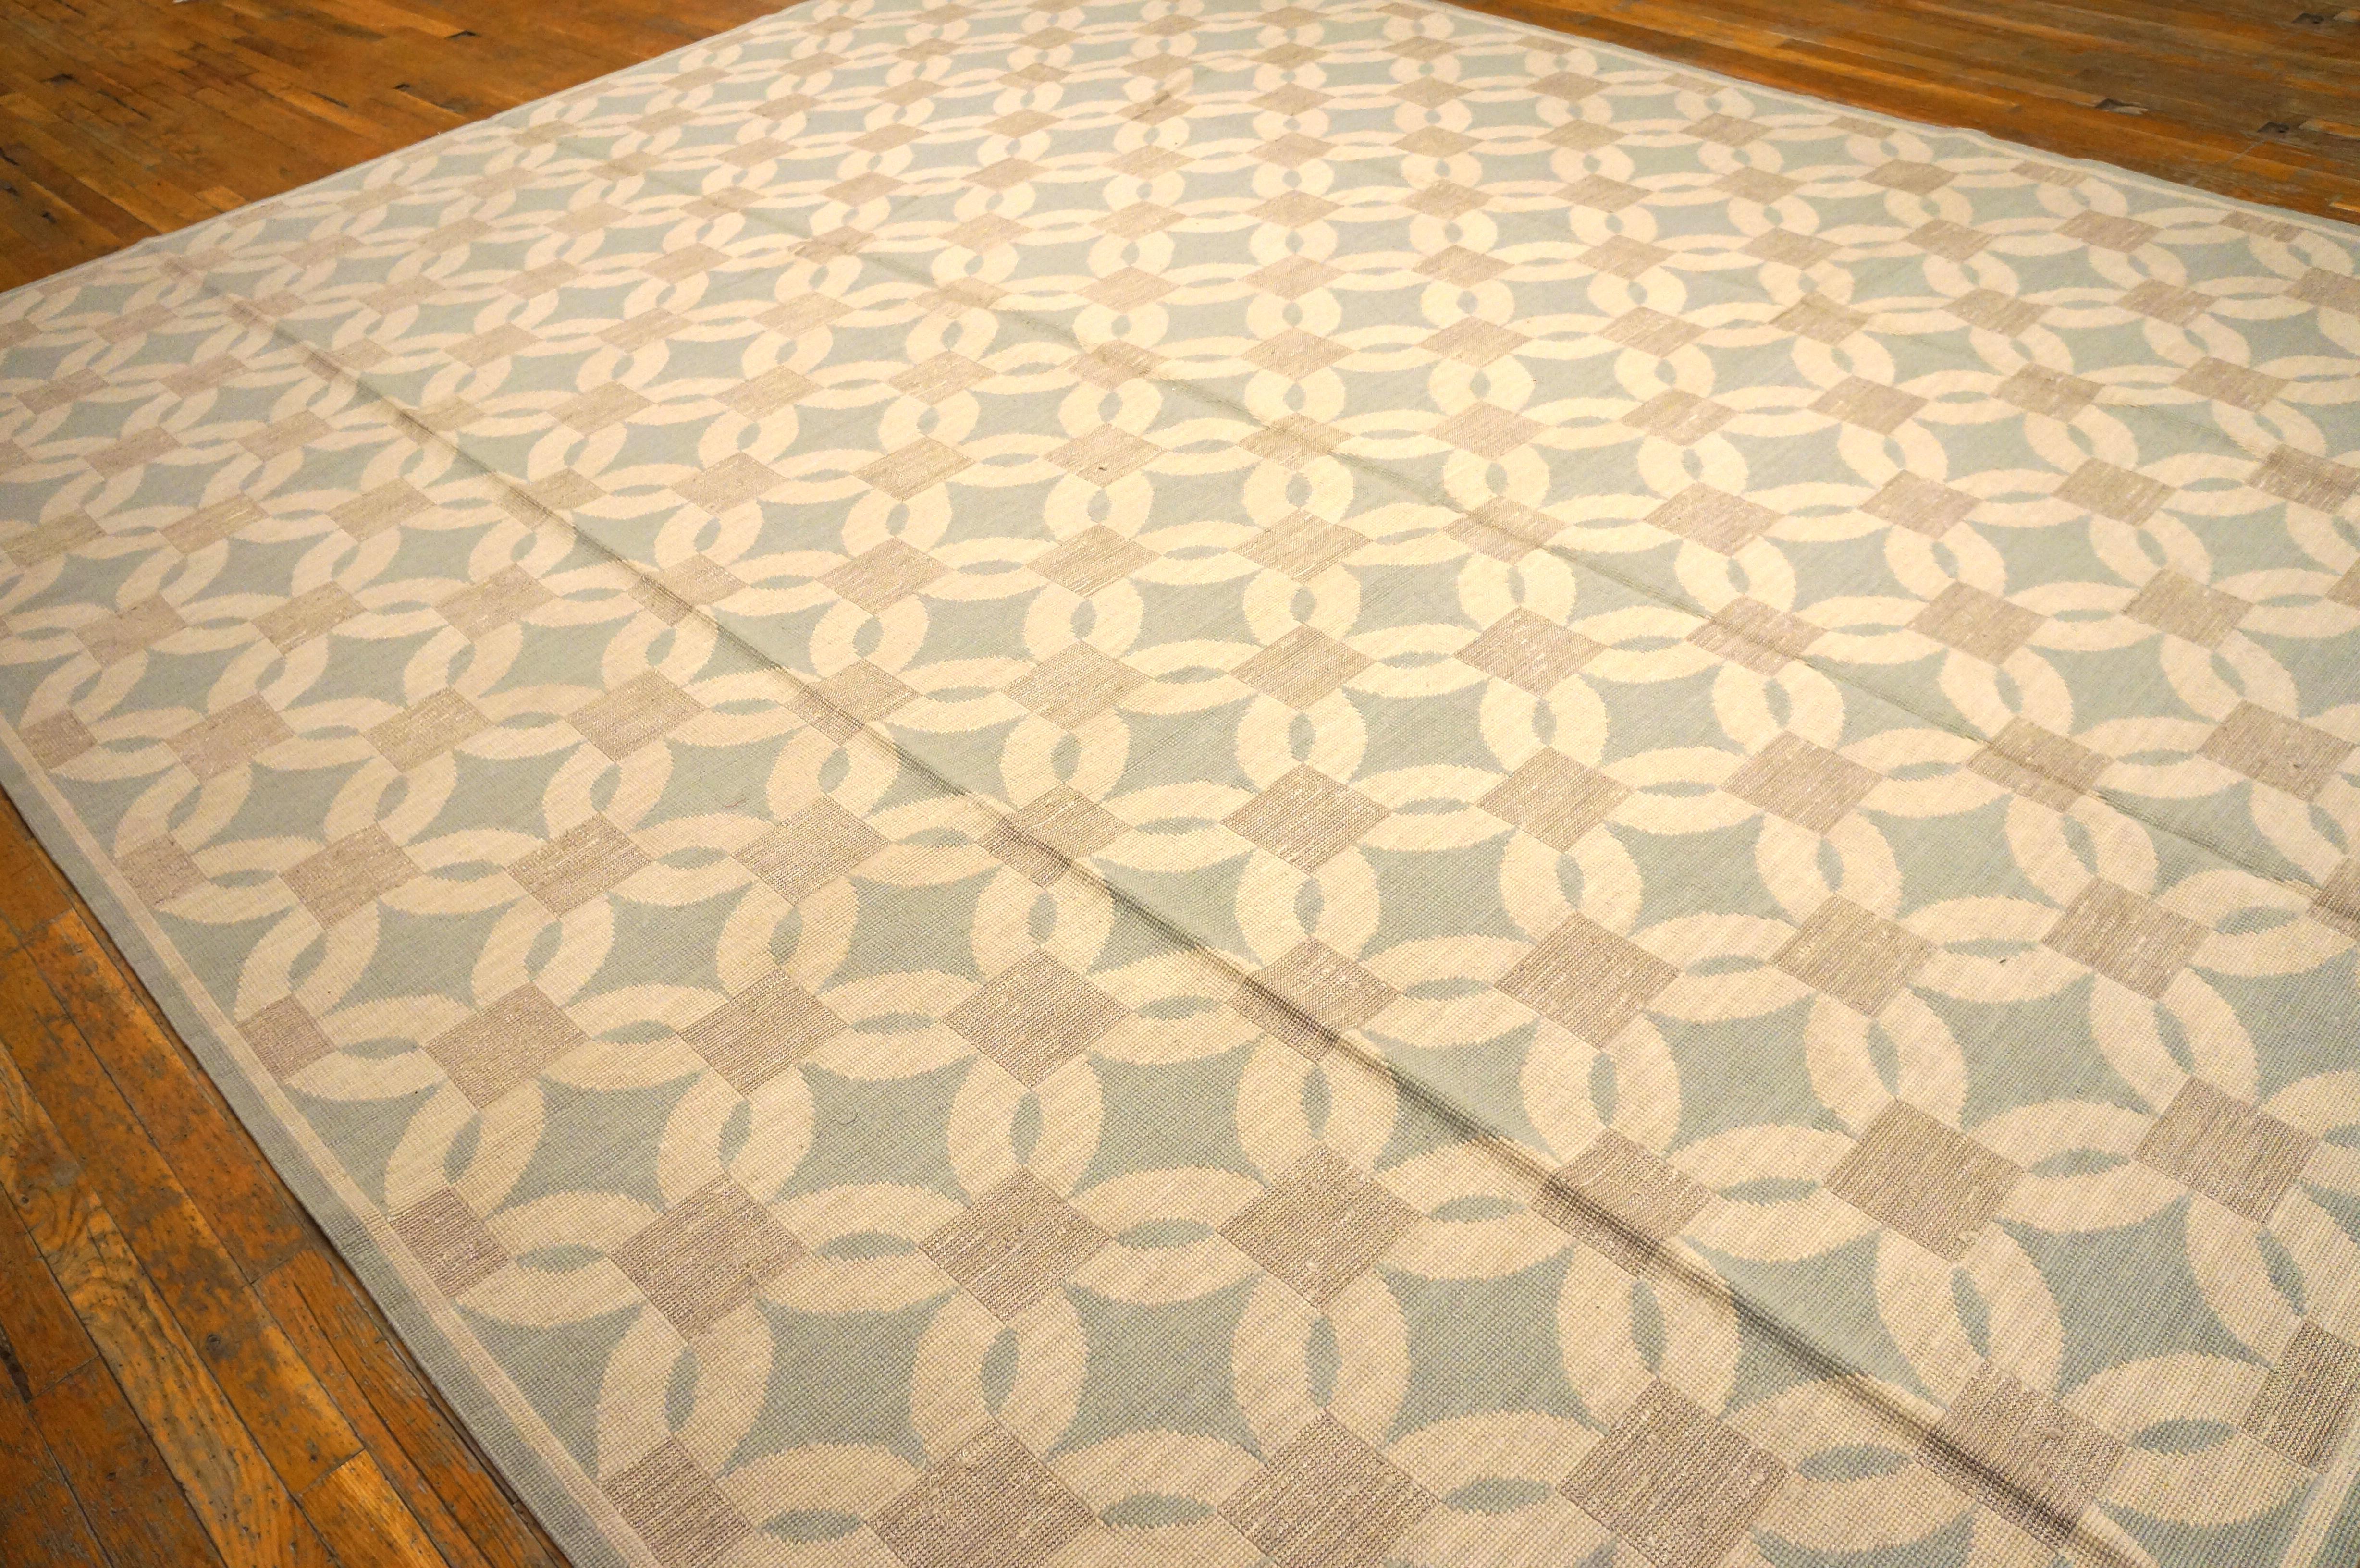 Contemporary Handwoven Wool Needlepoint Flat Weave Rug (6' x 9' - 183 x 274 cm) In New Condition For Sale In New York, NY